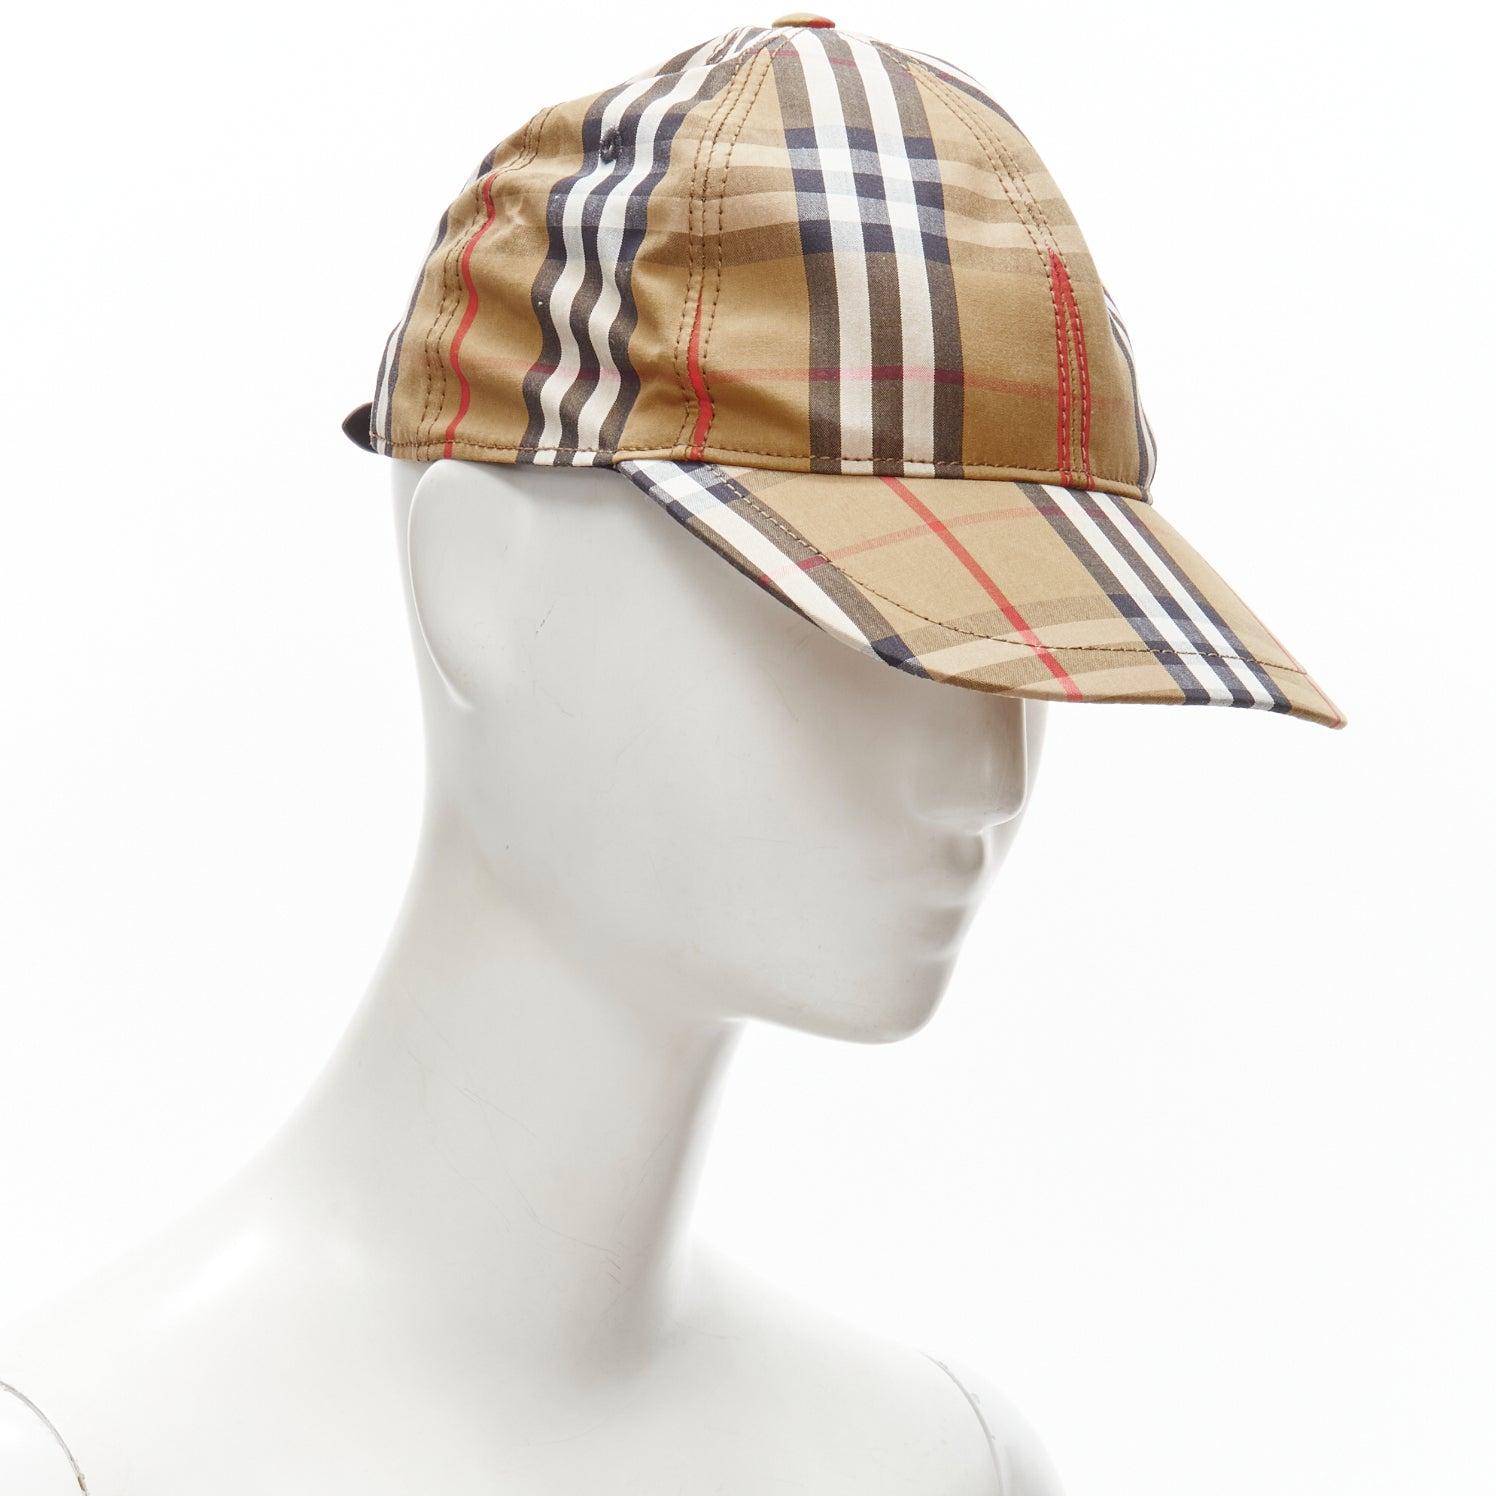 new BURBERRY House Check brown cotton adjustable leather strap dad cap S
Reference: ANWU/A00127
Brand: Burberry
Designer: Christopher Bailey
Collection: House Check
Material: Cotton
Color: Brown
Pattern: Checkered
Extra Details: Black leather strap